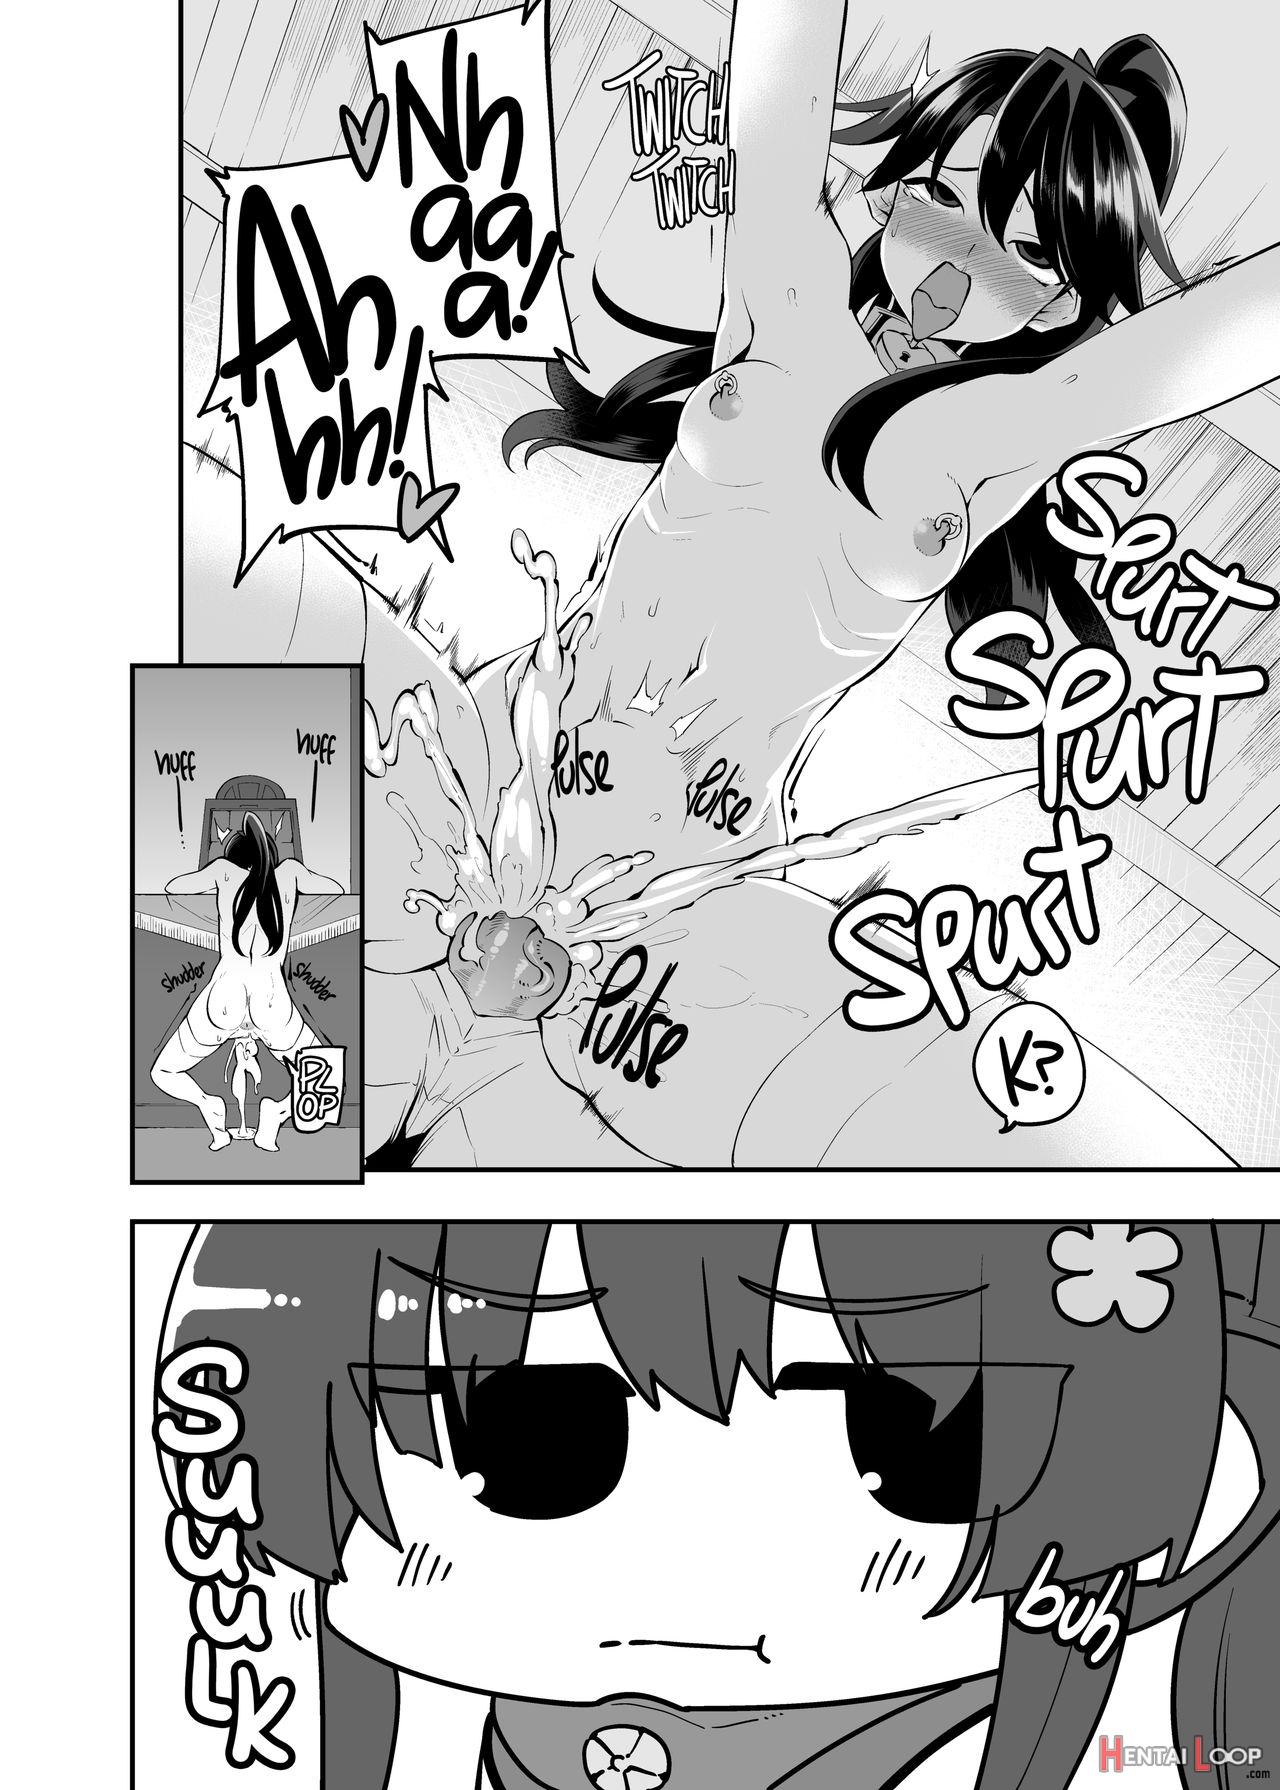 Onahole Yamato Reporting For Duty page 5